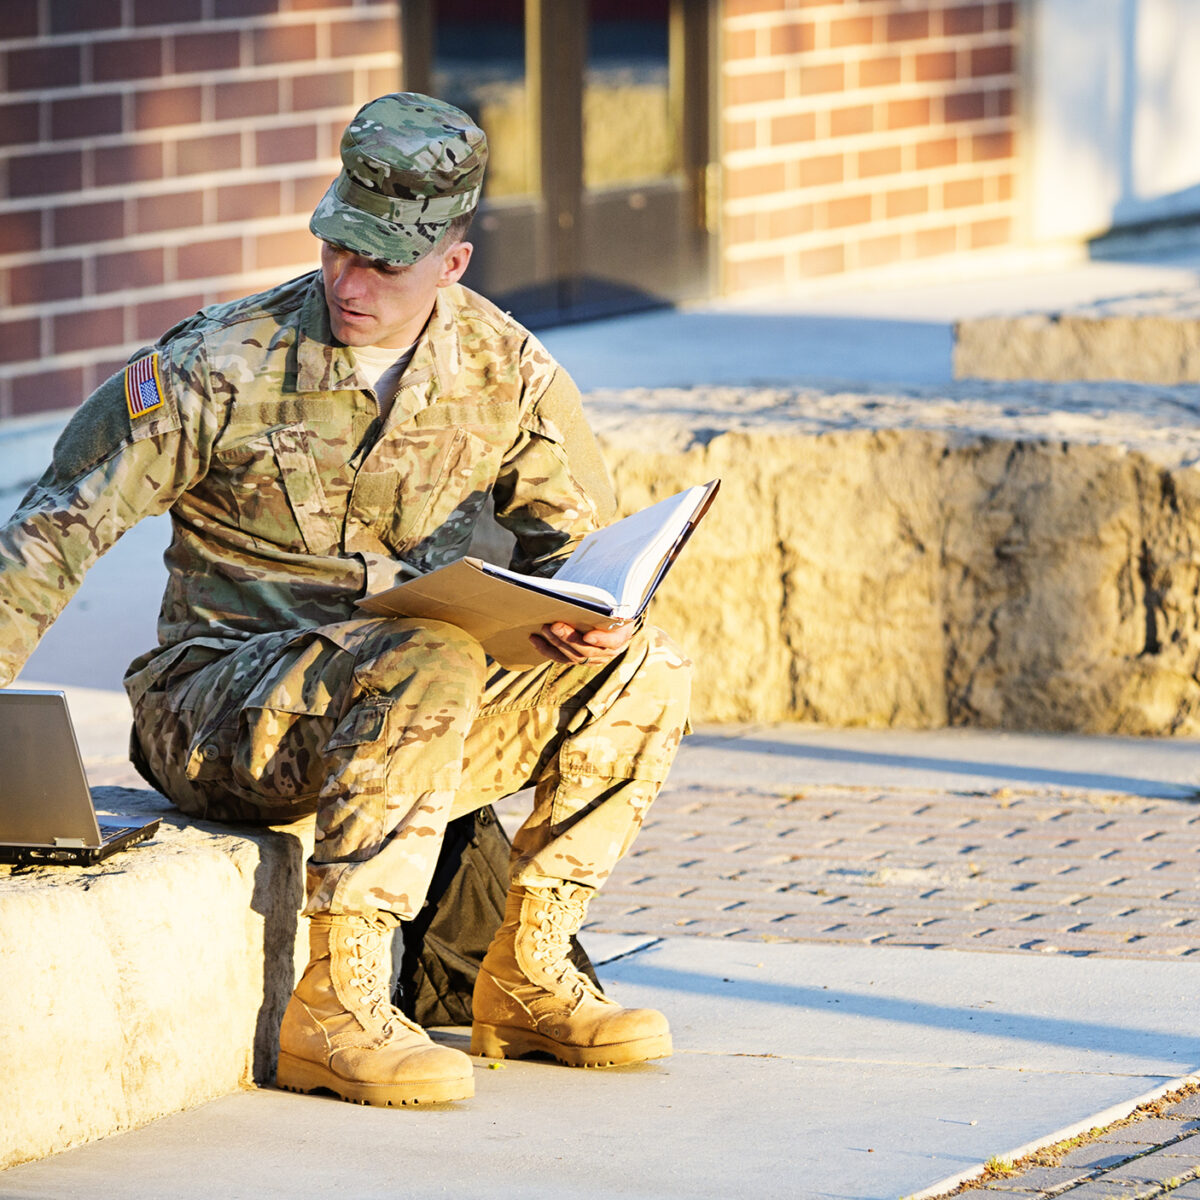 US soldier in camouflage uniform with laptop in front of campus